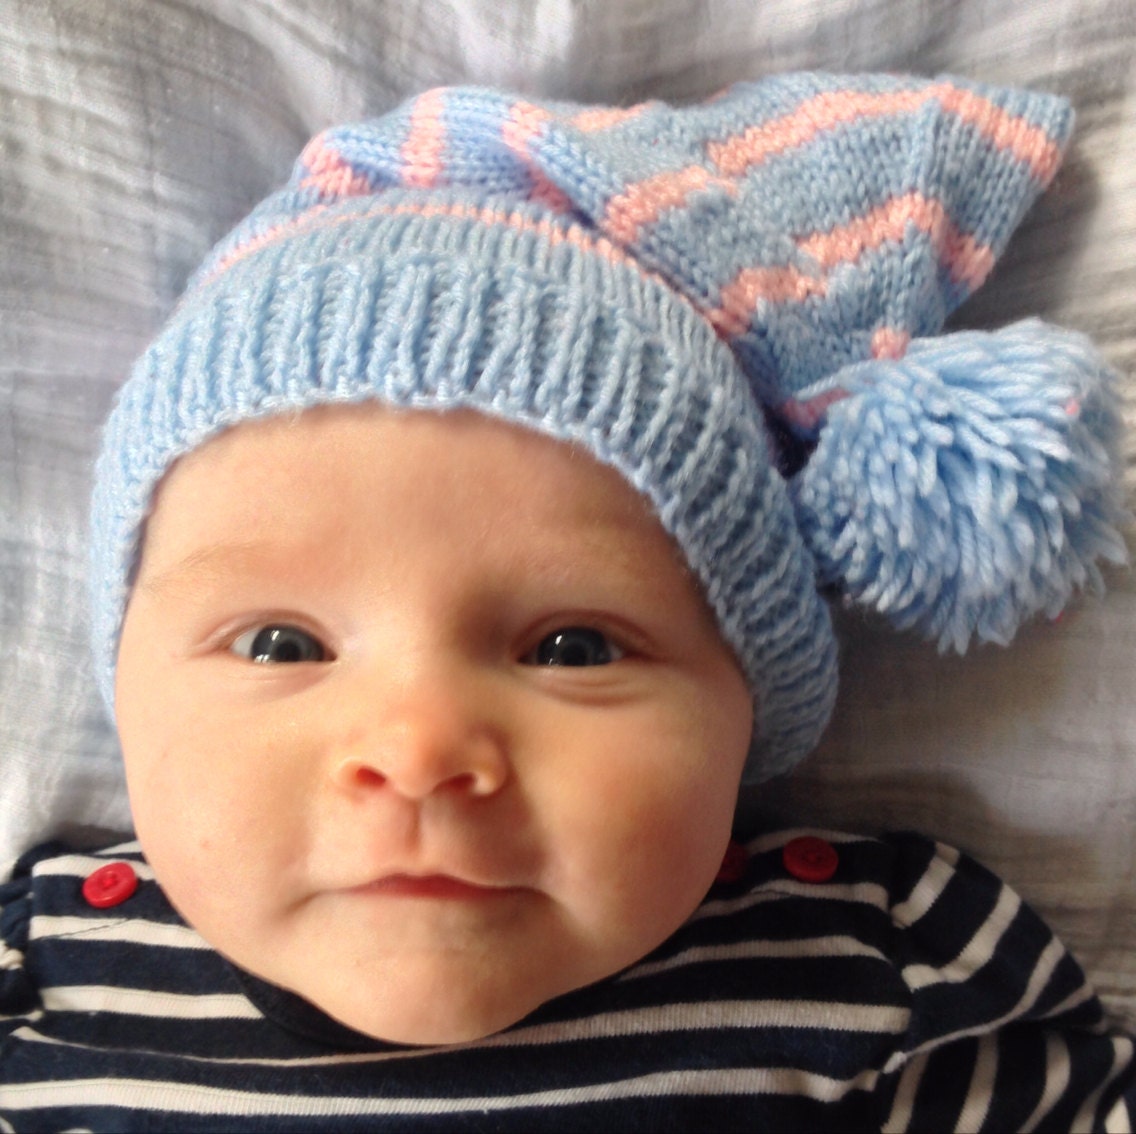 Baby blue and pink striped 'Wee Willy Winkie' hat by meandmynan